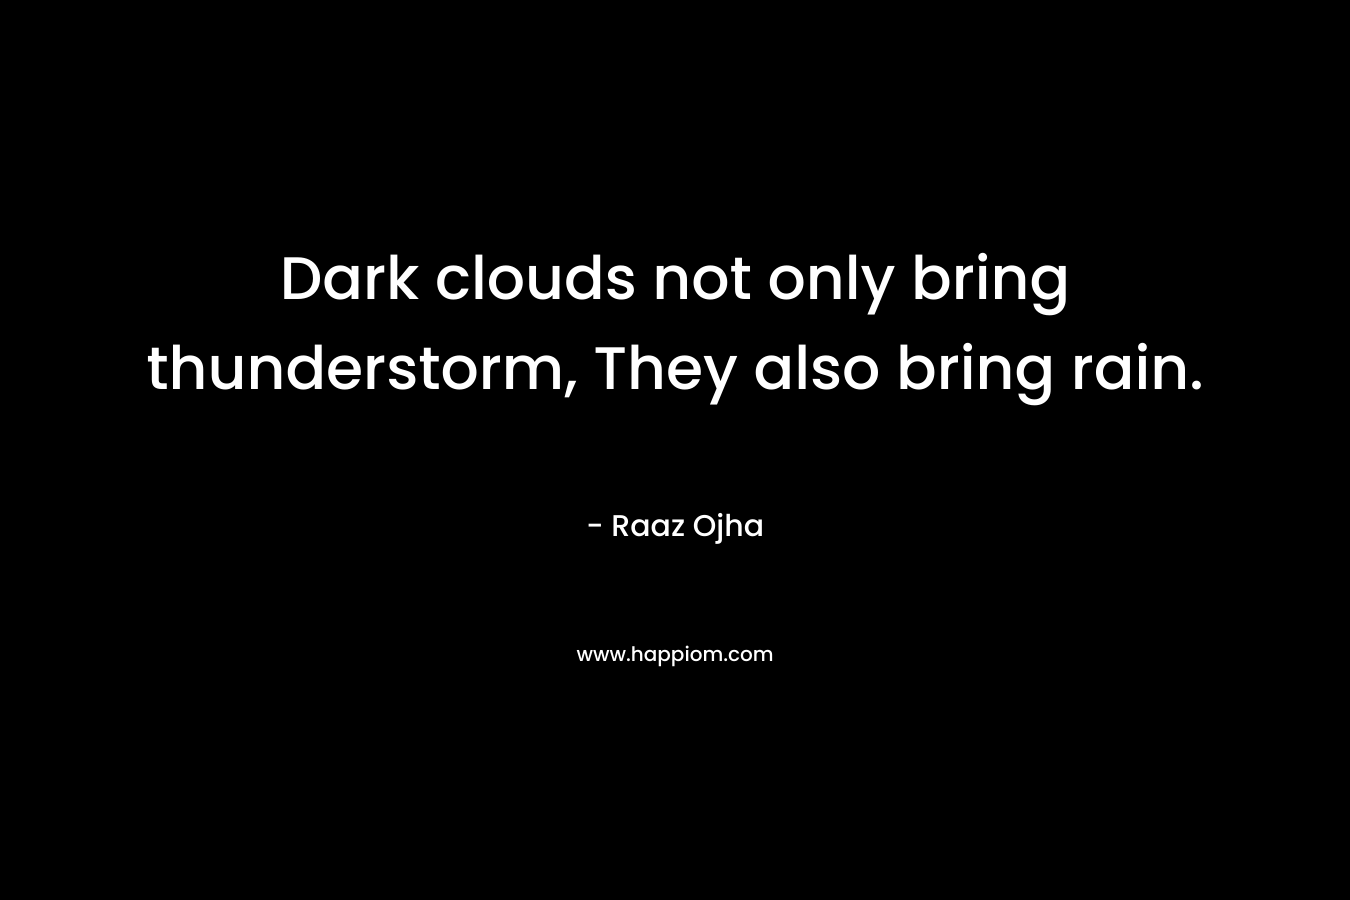 Dark clouds not only bring thunderstorm, They also bring rain. – Raaz Ojha